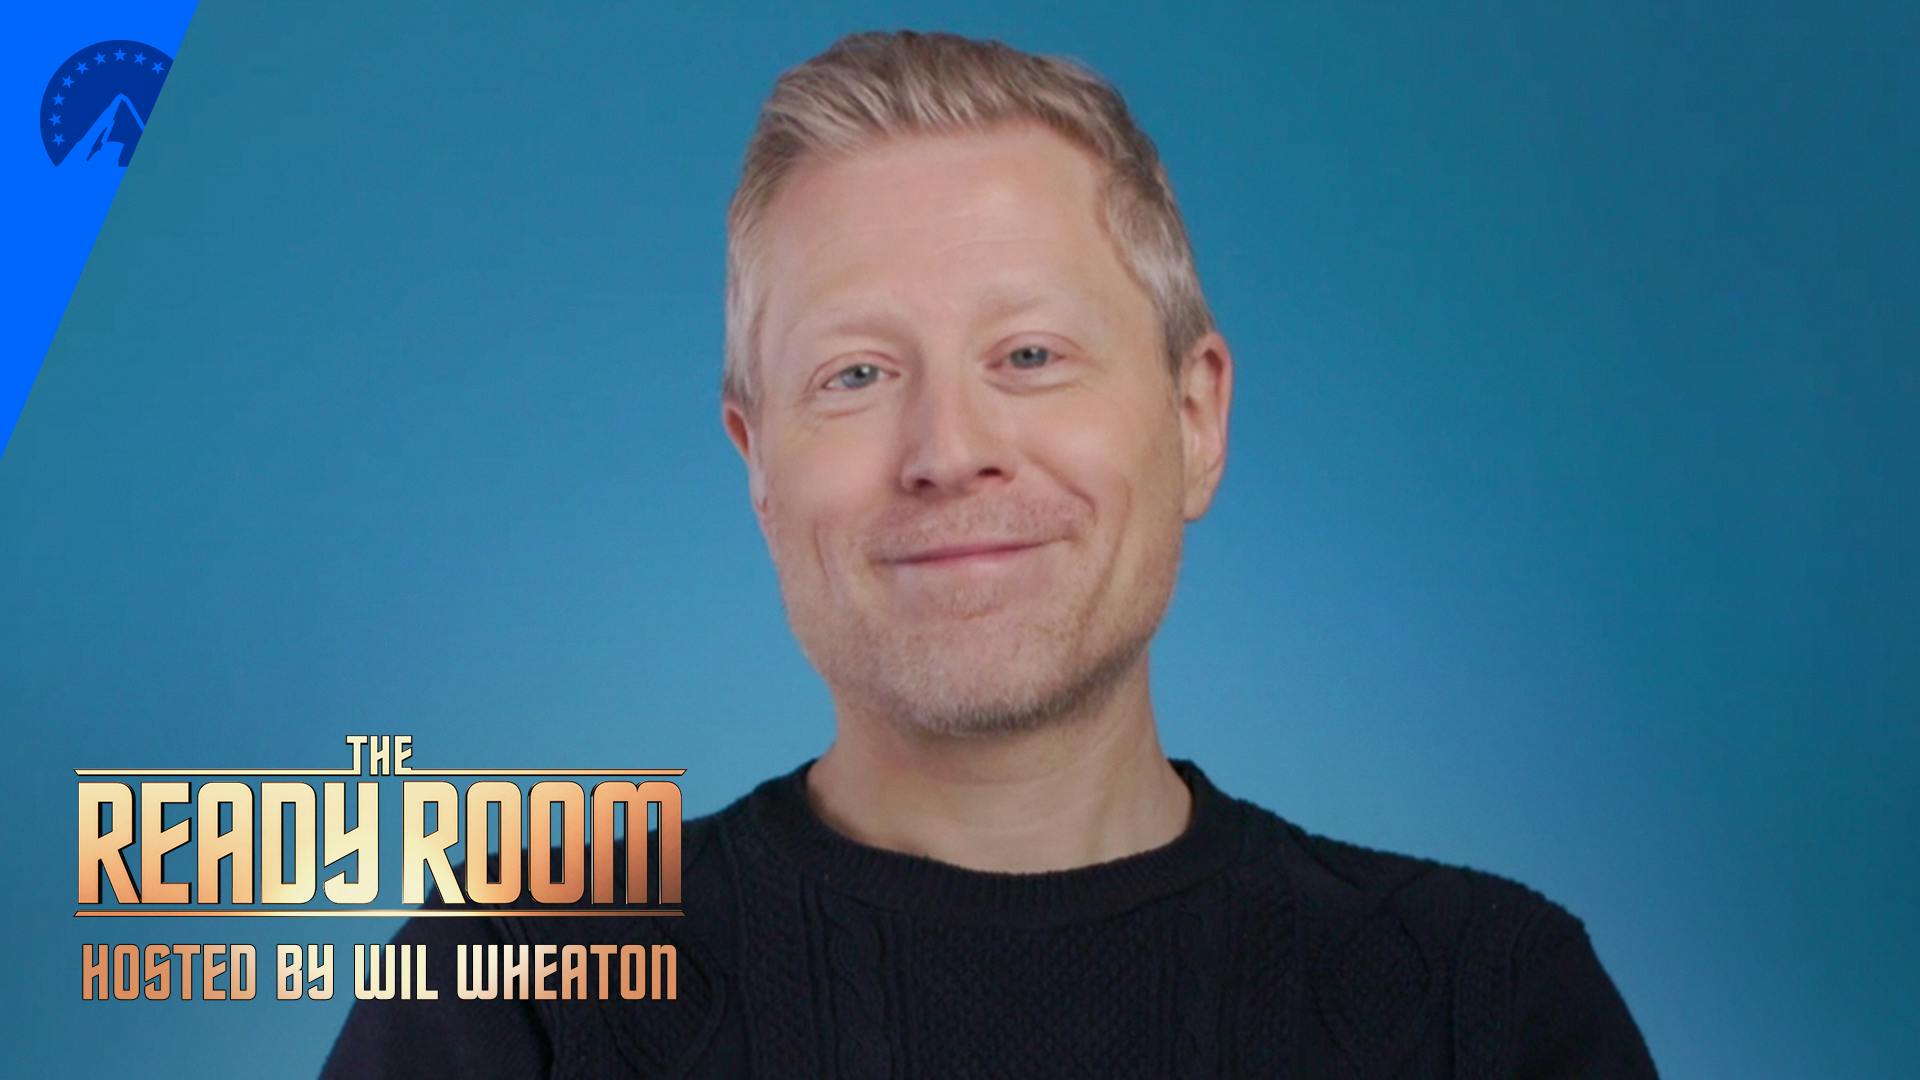 Anthony Rapp joins The Ready Room